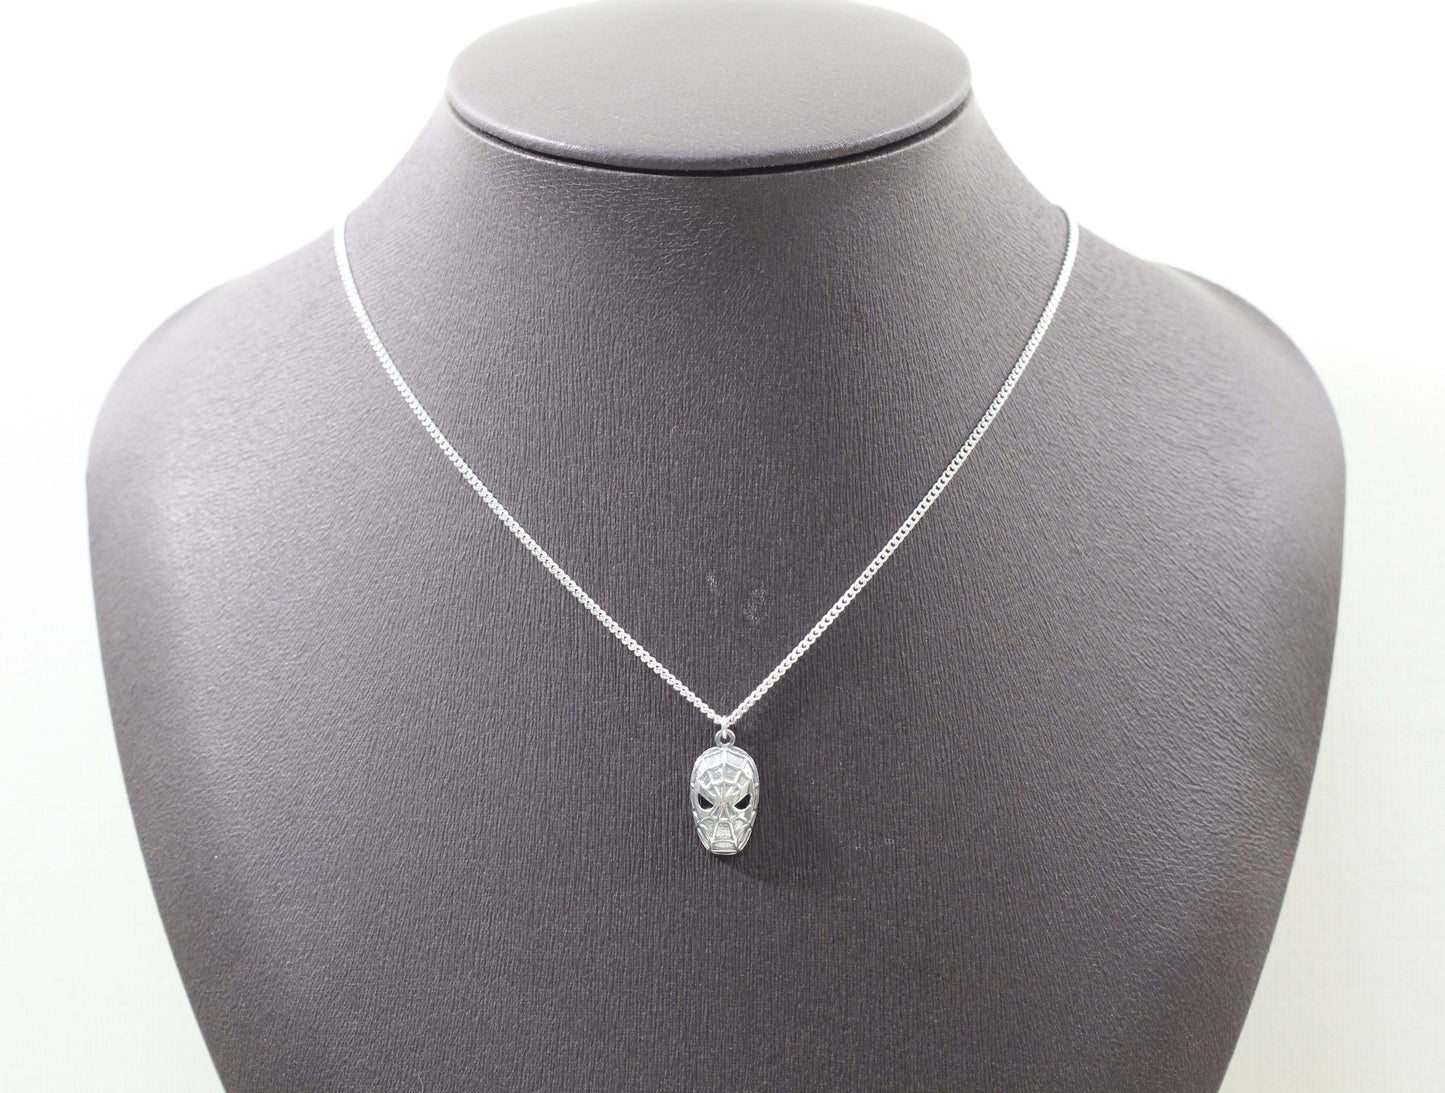 925 sterling silver Spiderman Mask pendant necklace